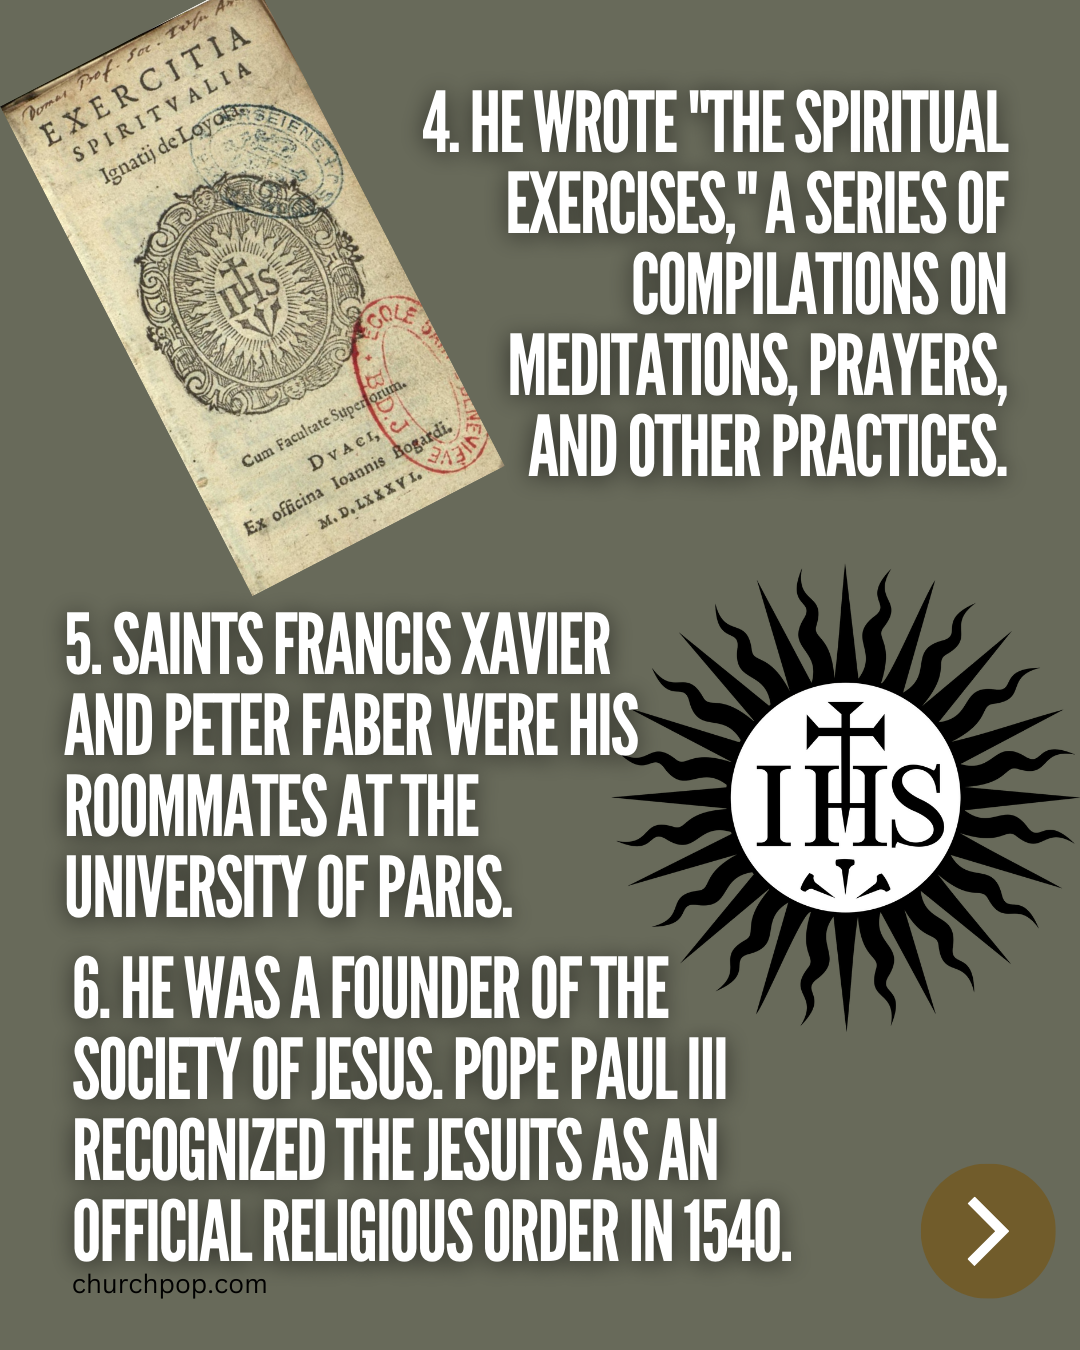 What is St. Ignatius of Loyola known for?